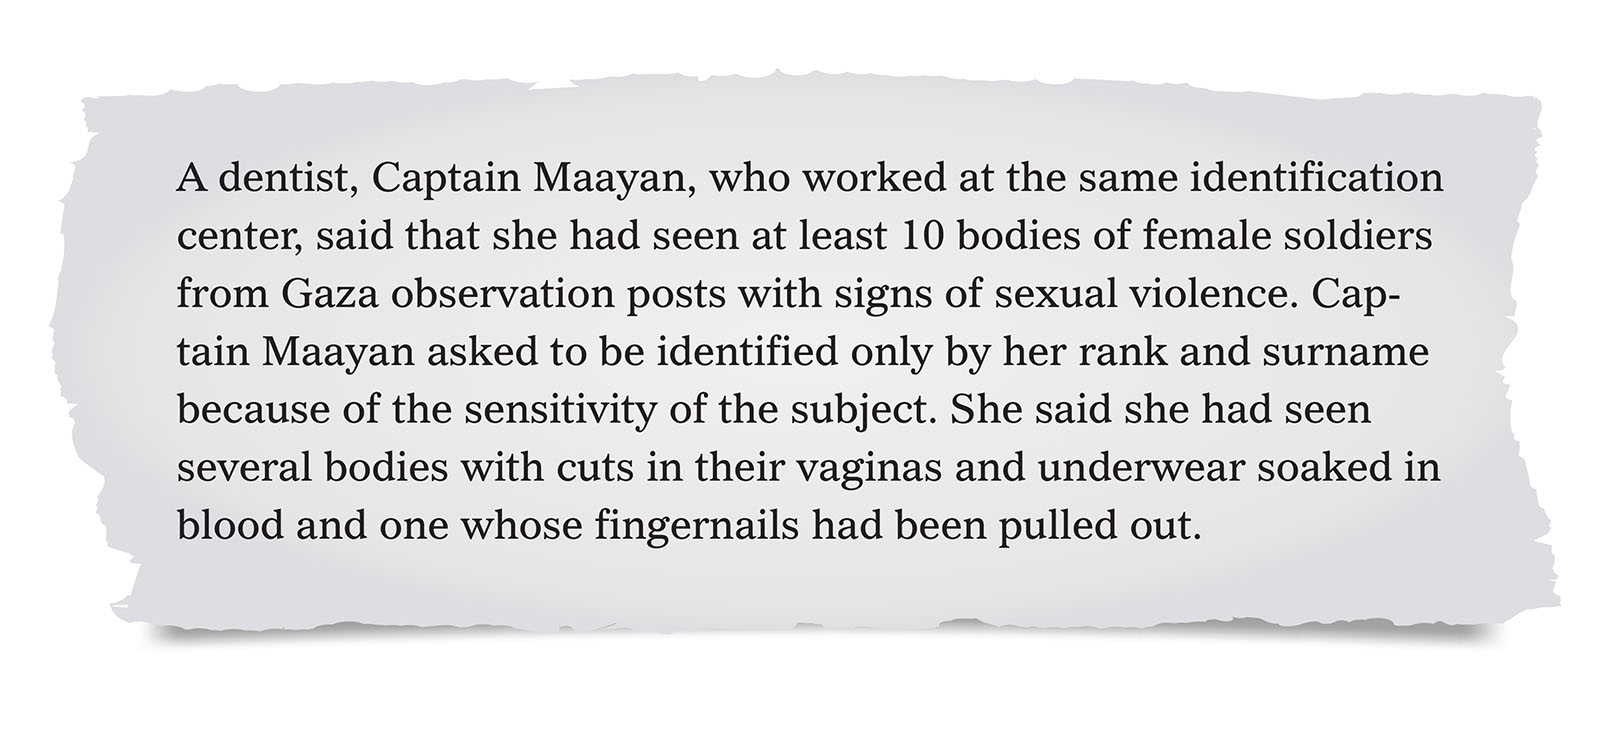 Pull quote:
A dentist, Captain Maayan, who worked at the same identification center, said that she had seen at least 10 bodies of female soldiers from Gaza observation posts with signs of sexual violence. Captain Maayan asked to be identified only by her rank and surname because of the sensitivity of the subject. She said she had seen several bodies with cuts in their vaginas and underwear soaked in blood and one whose fingernails had been pulled out.